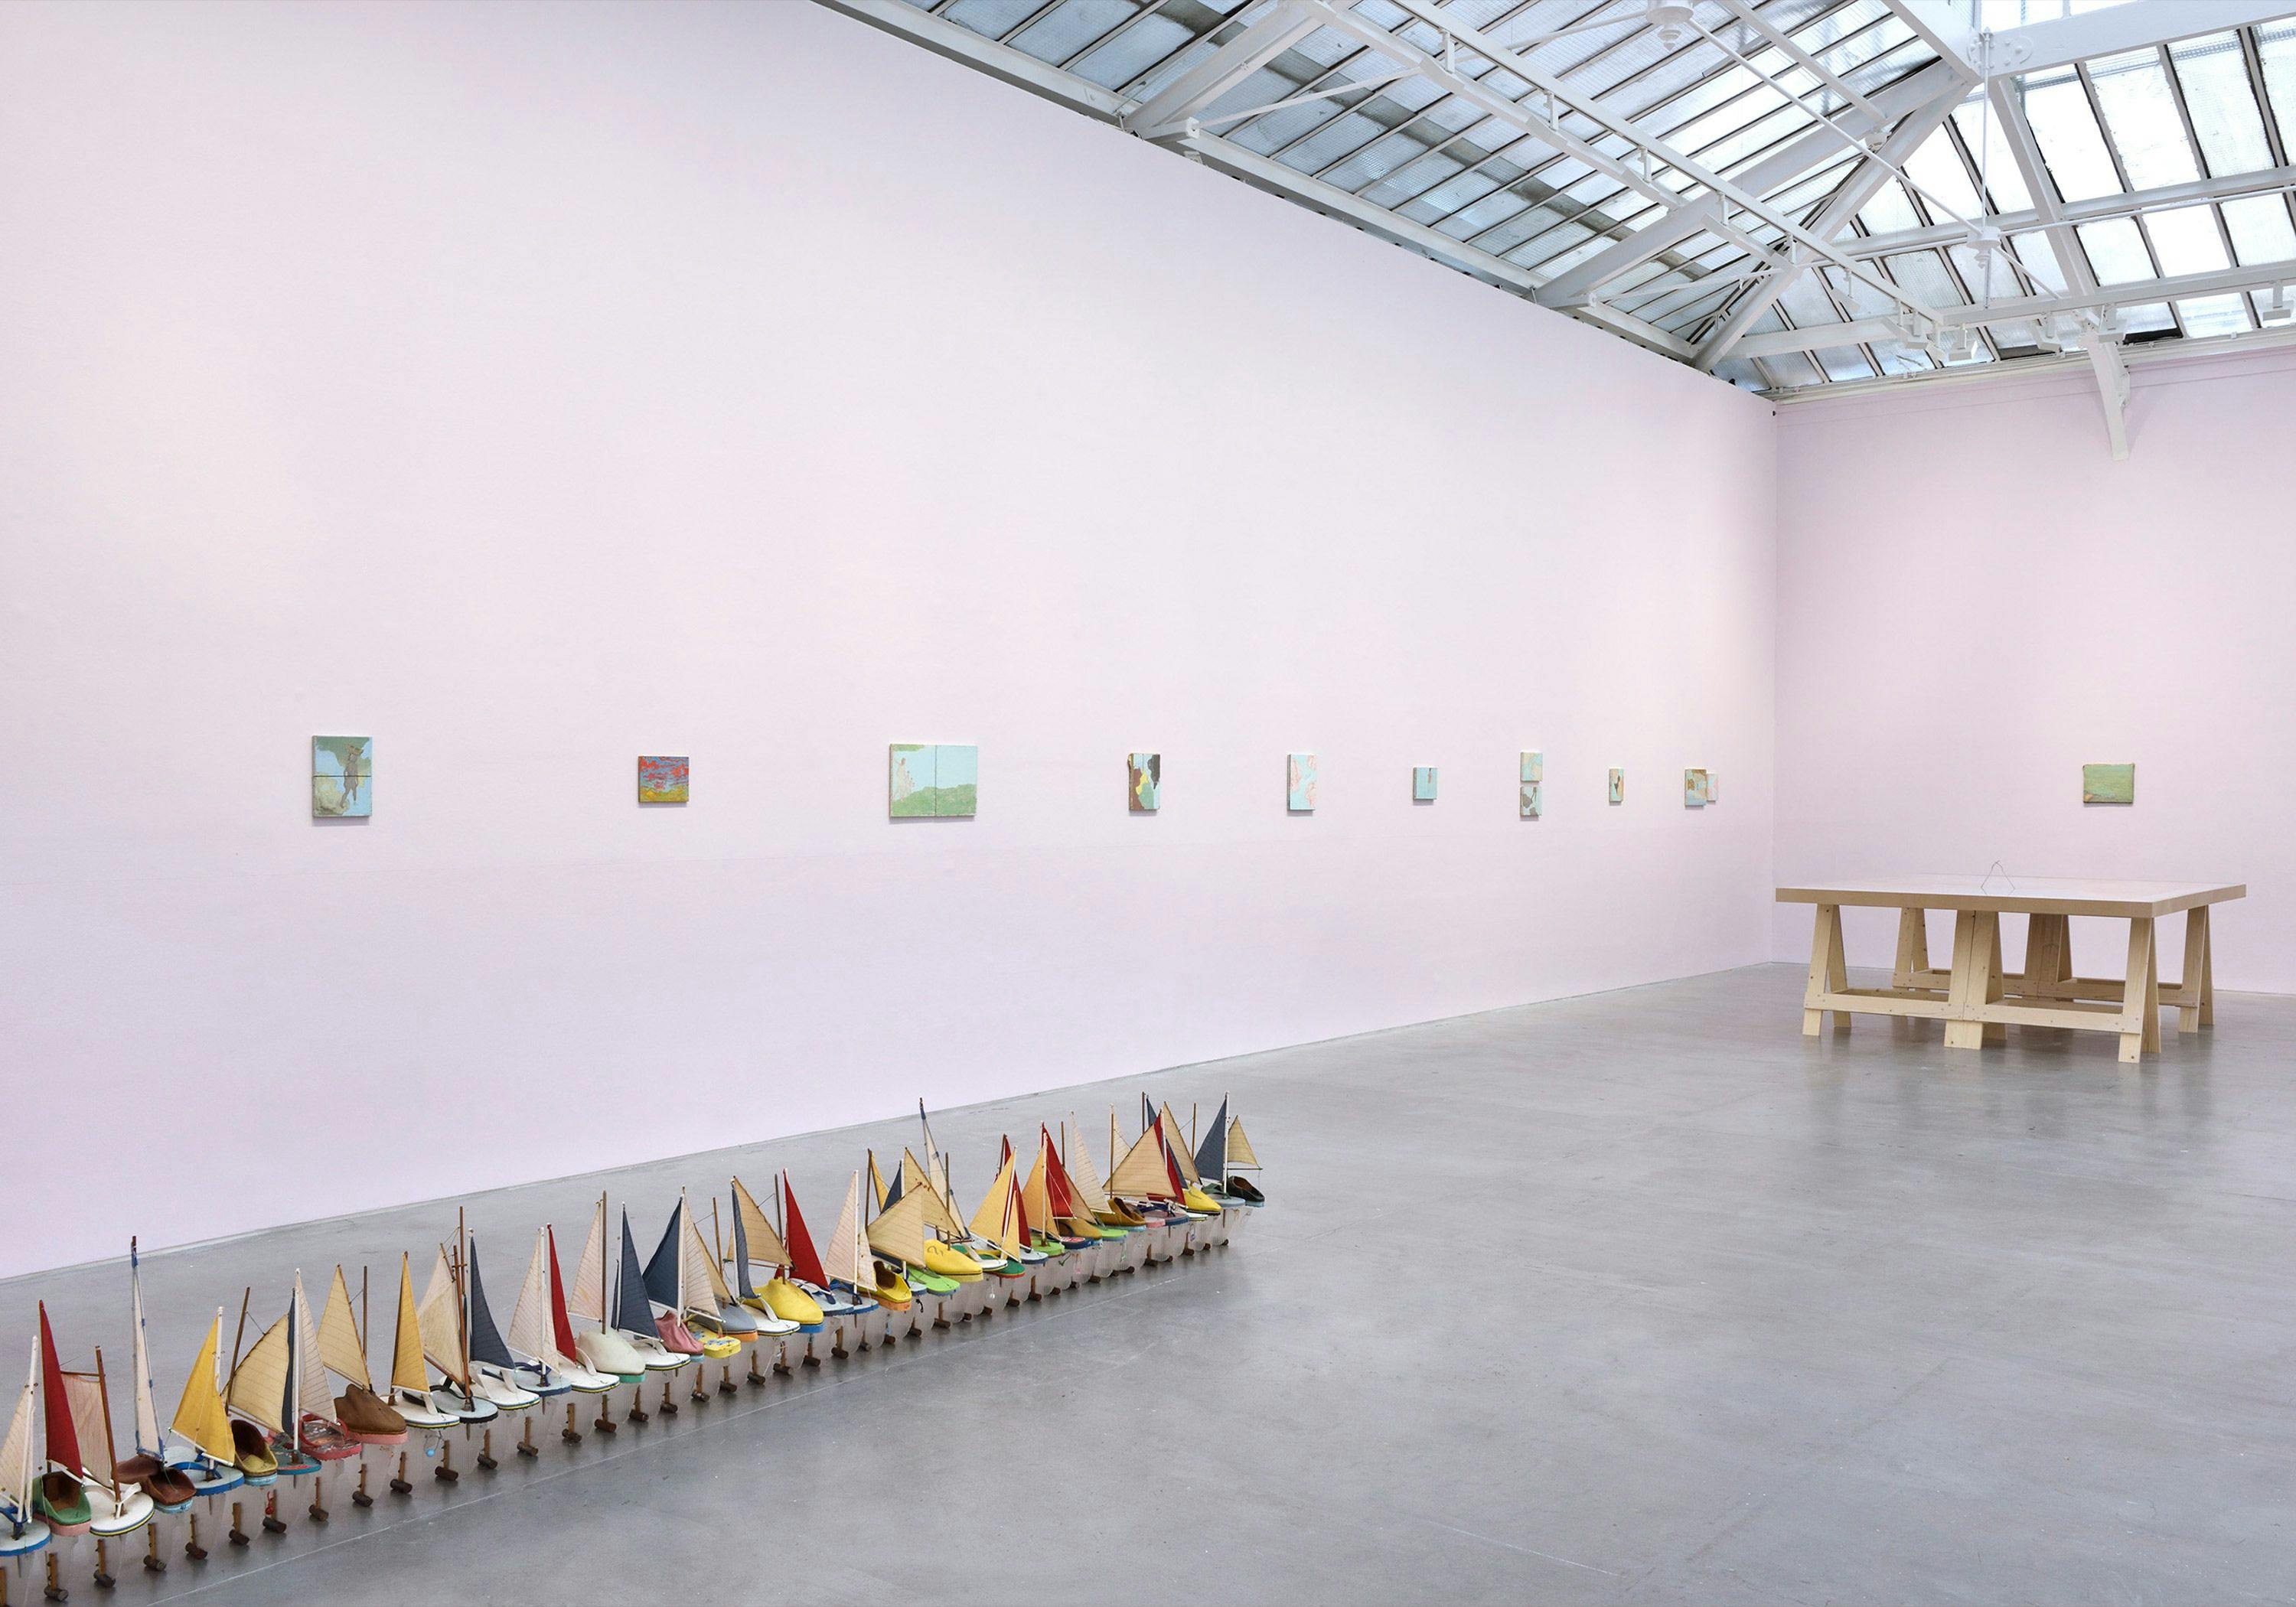 An installation by Francis Alÿs, titled Don't Cross the Bridge Before You Get to the River, 2006 to 2012.